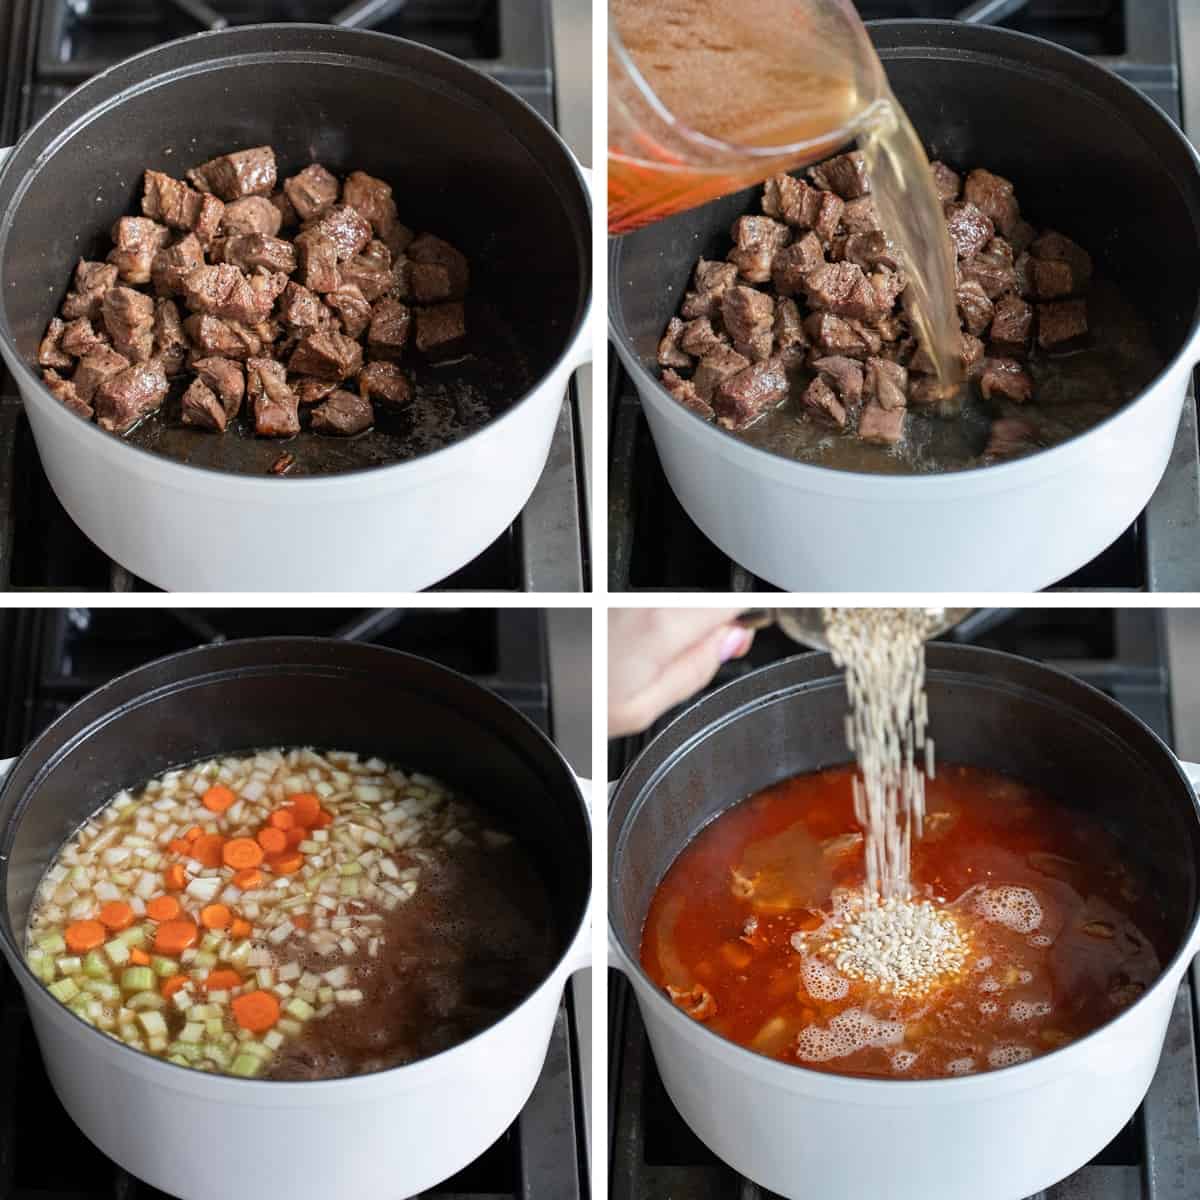 Steps for making Beef Barley Soup in a pot on the stove.